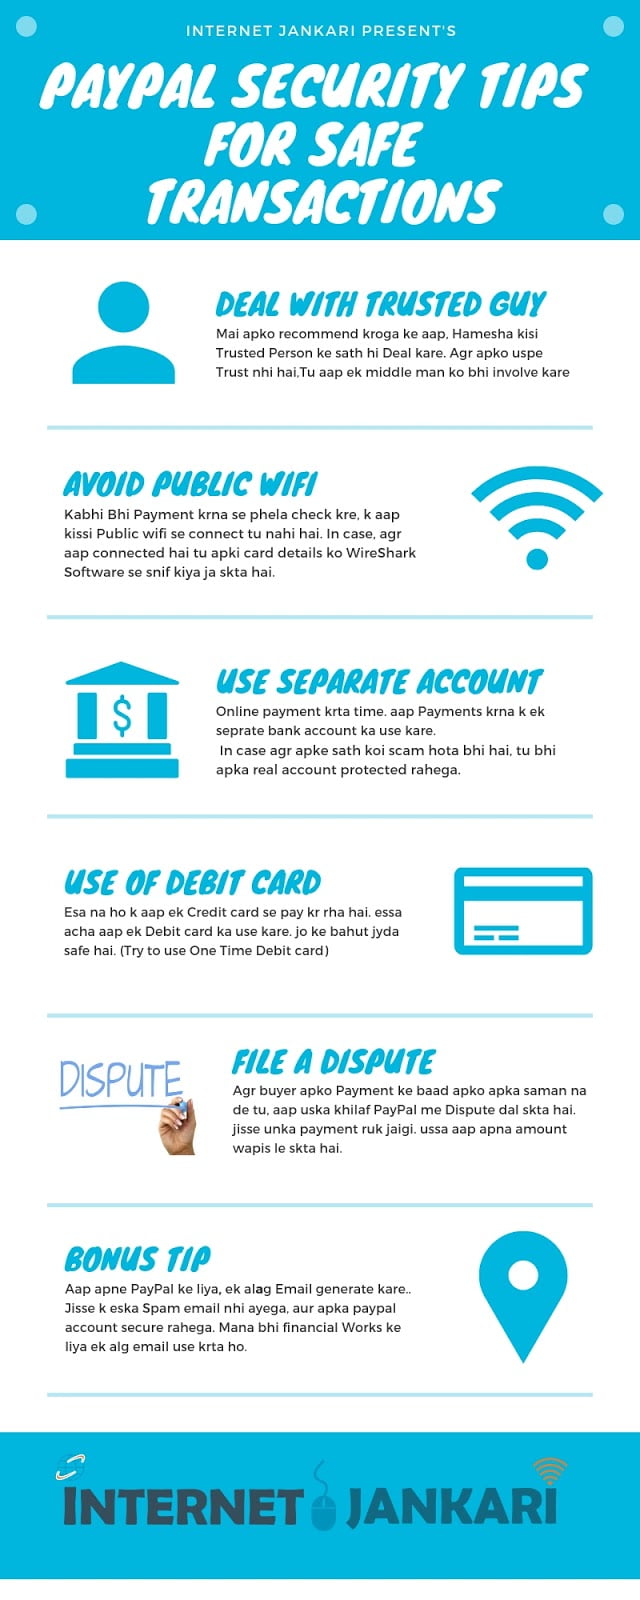 PAYPAL SECURITY TIPS FOR SAFE TRANSACTIONS